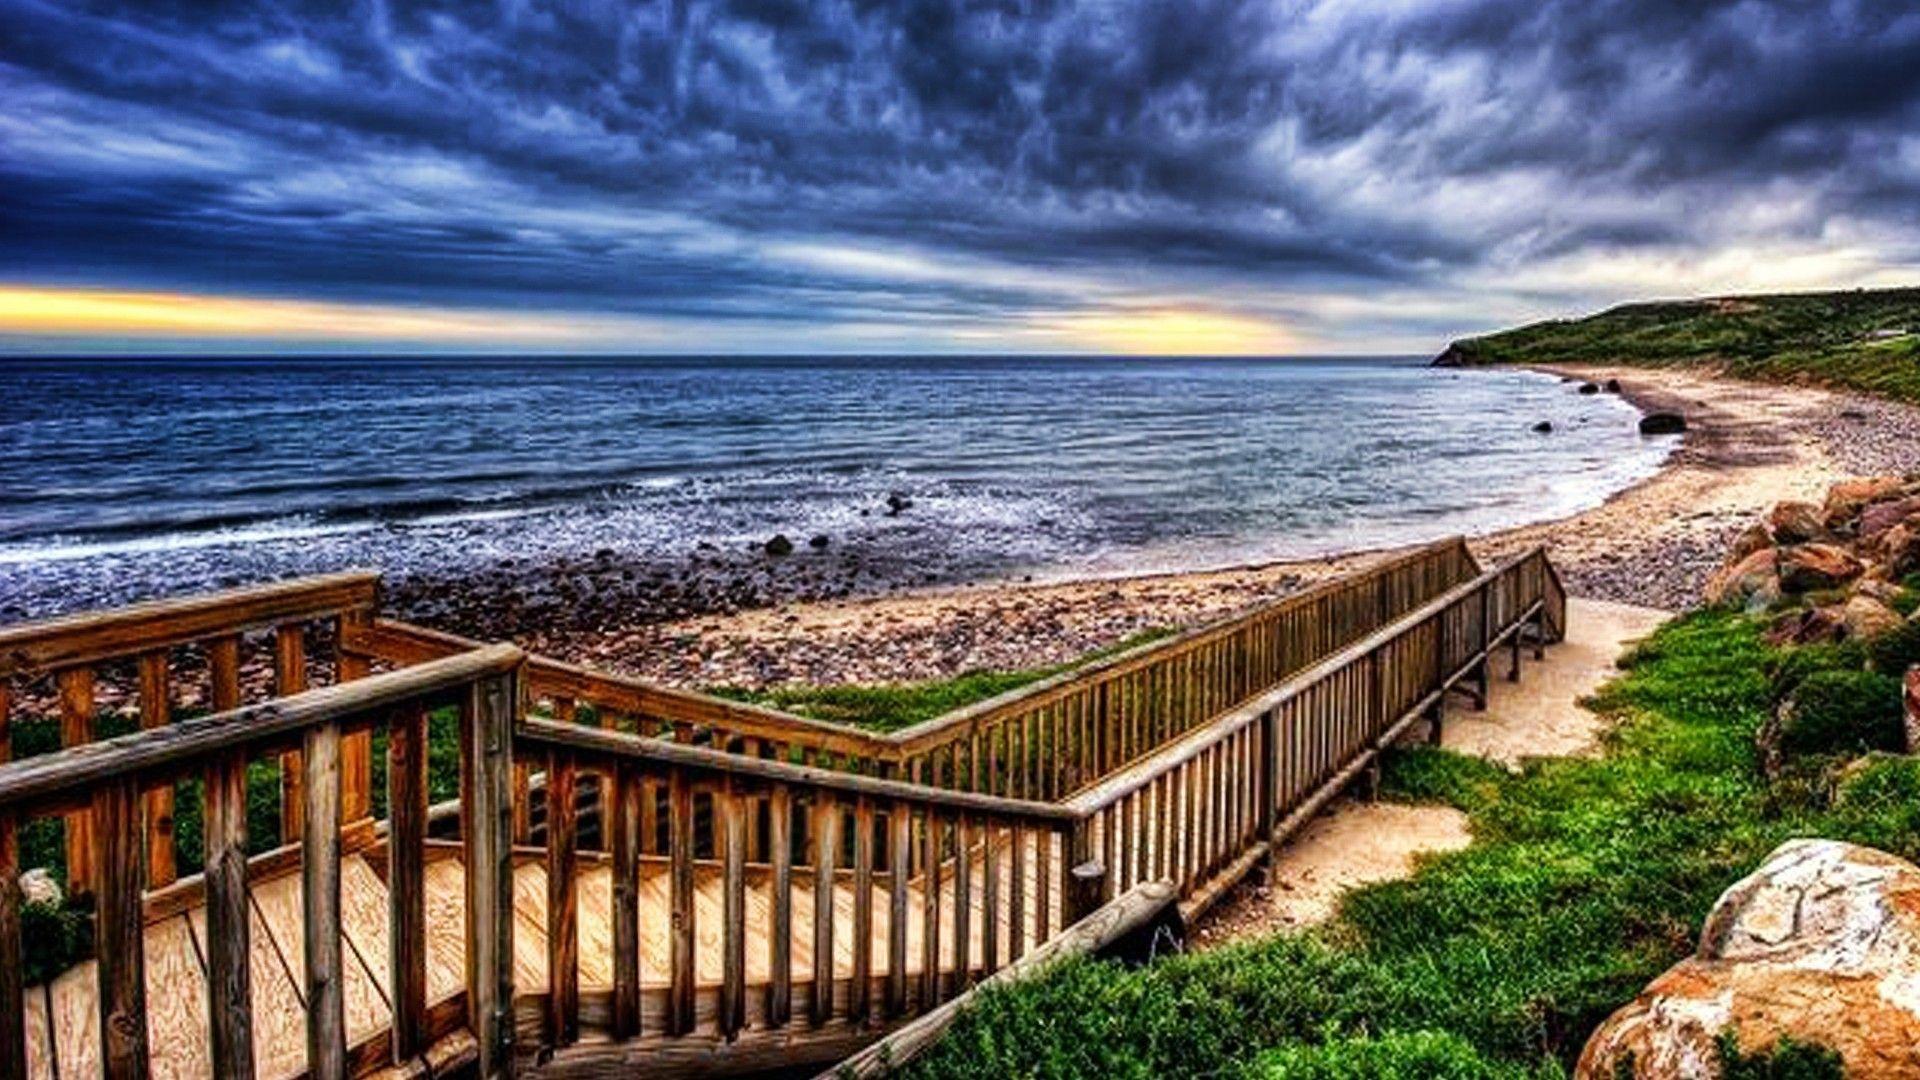 Stairway to paradise wallpaper. PC